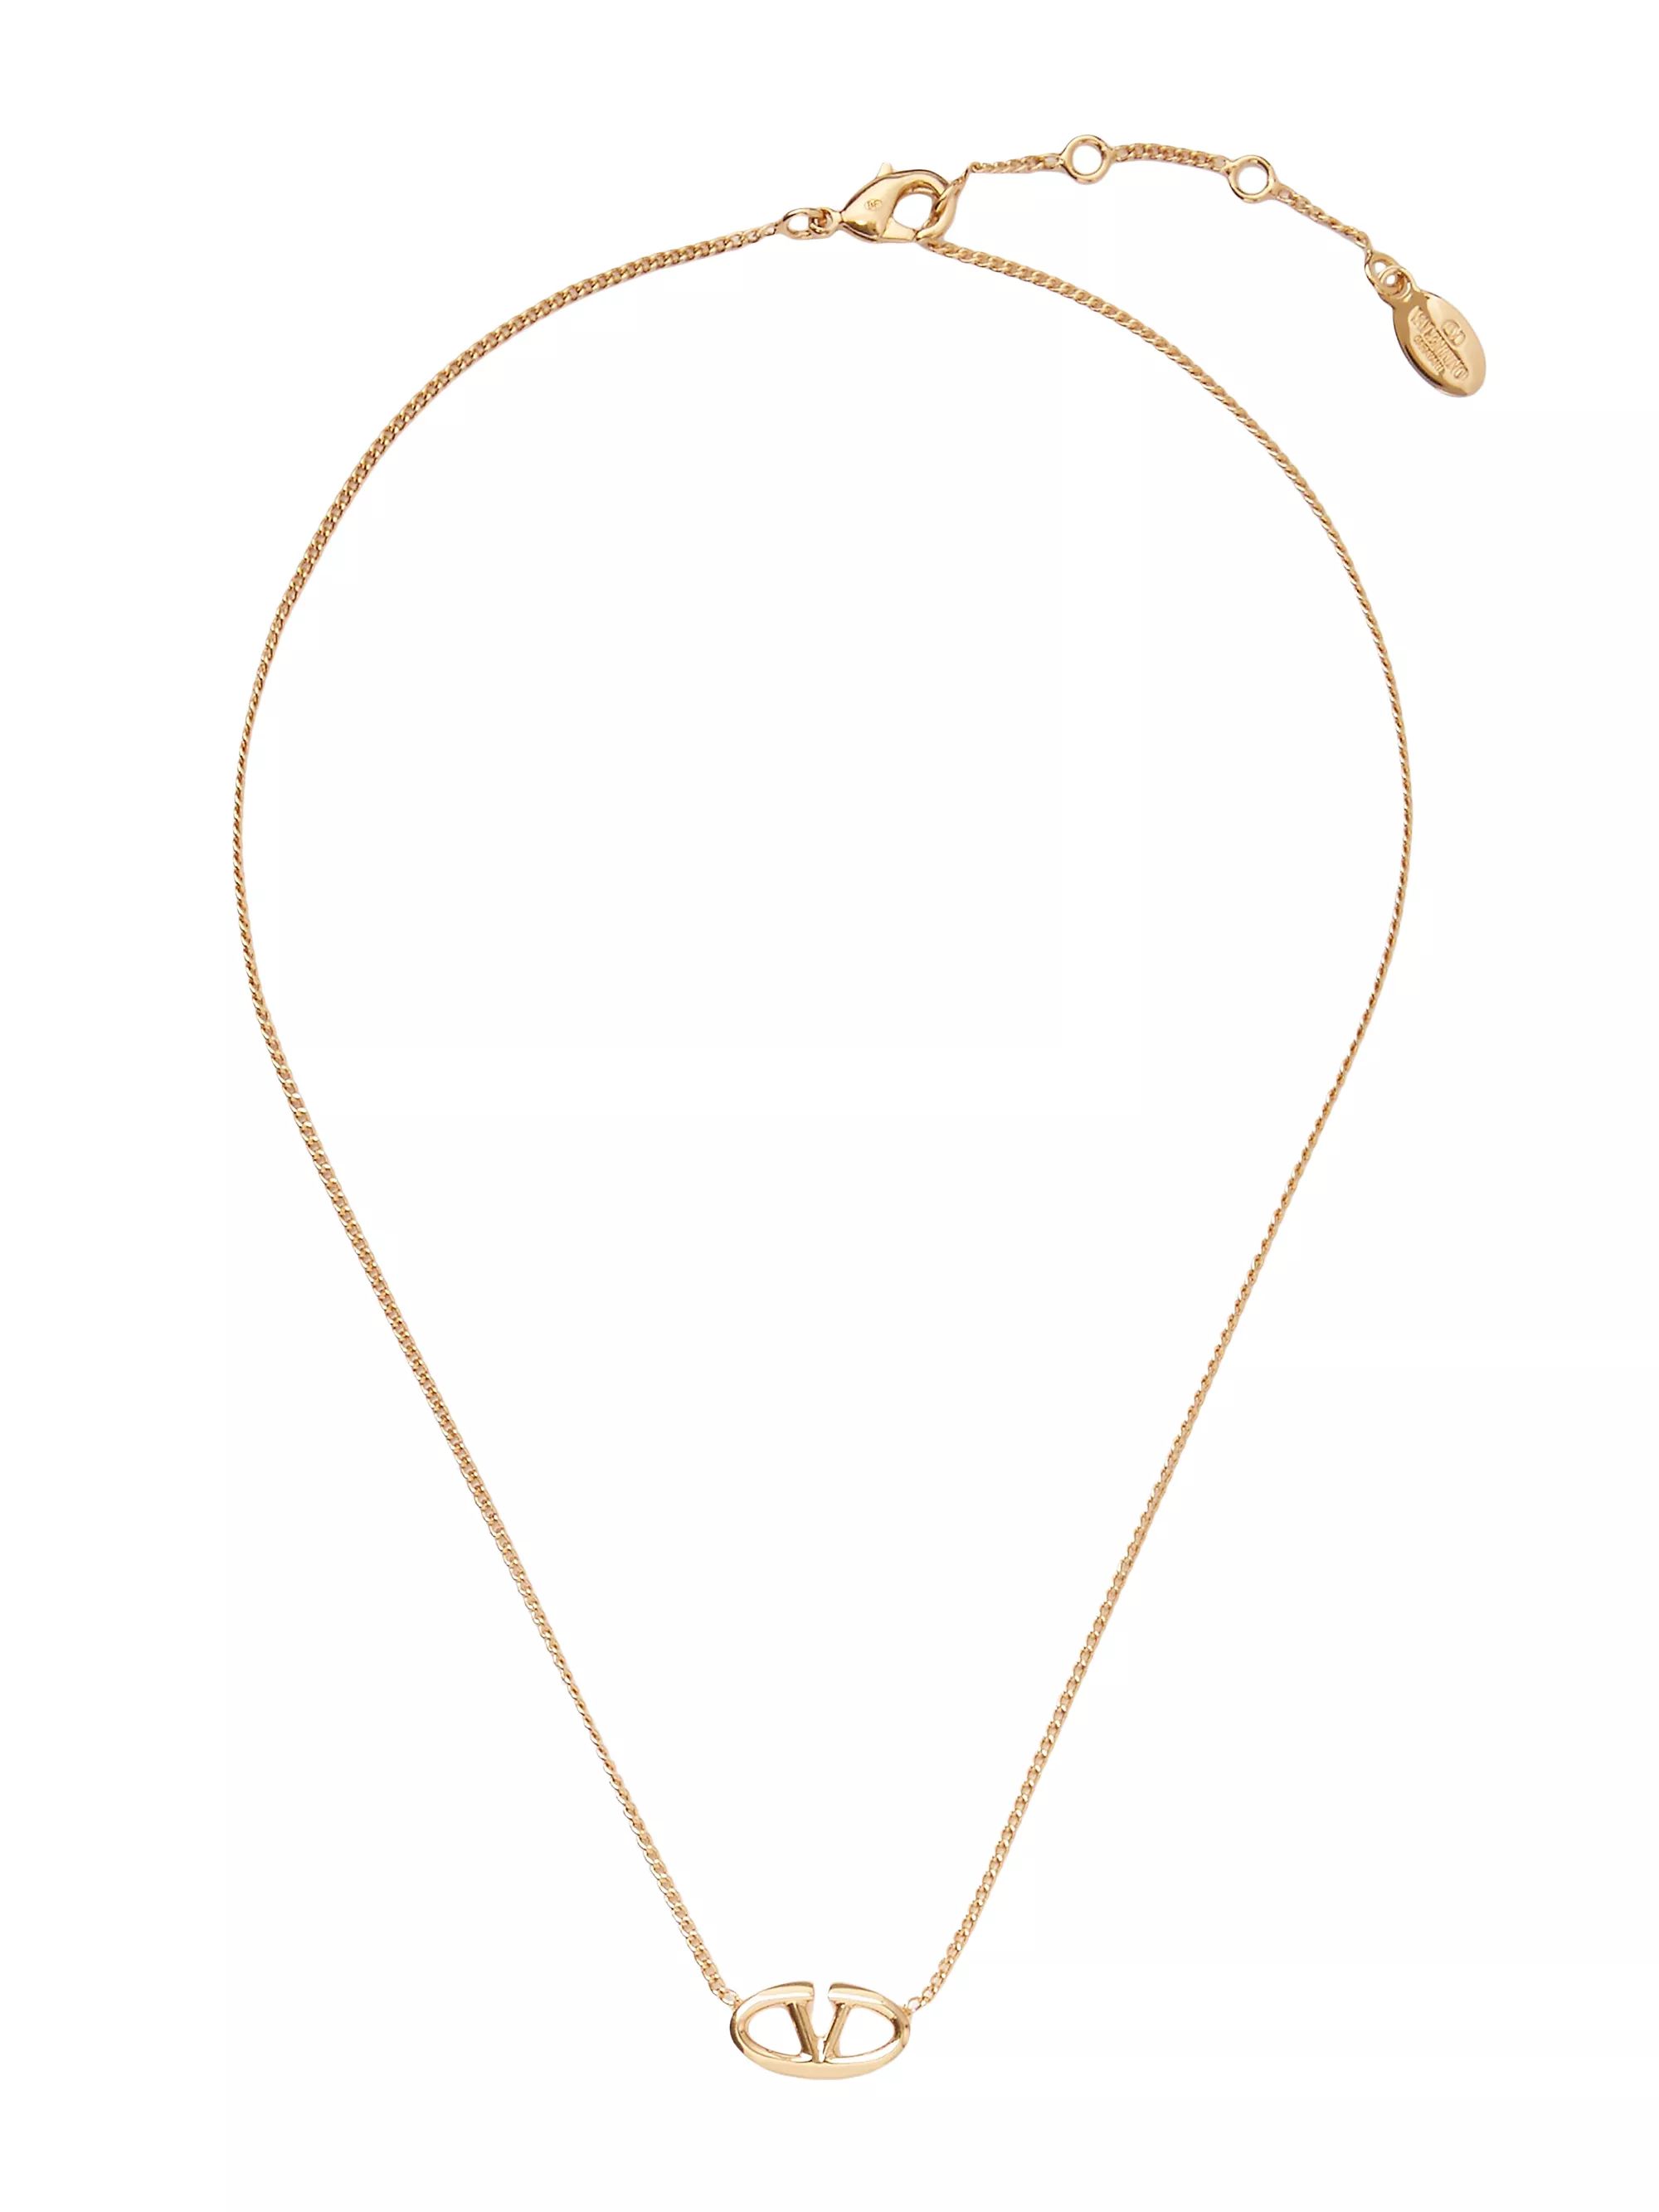 VLogo The Bold Edition Metal Necklace | Saks Fifth Avenue